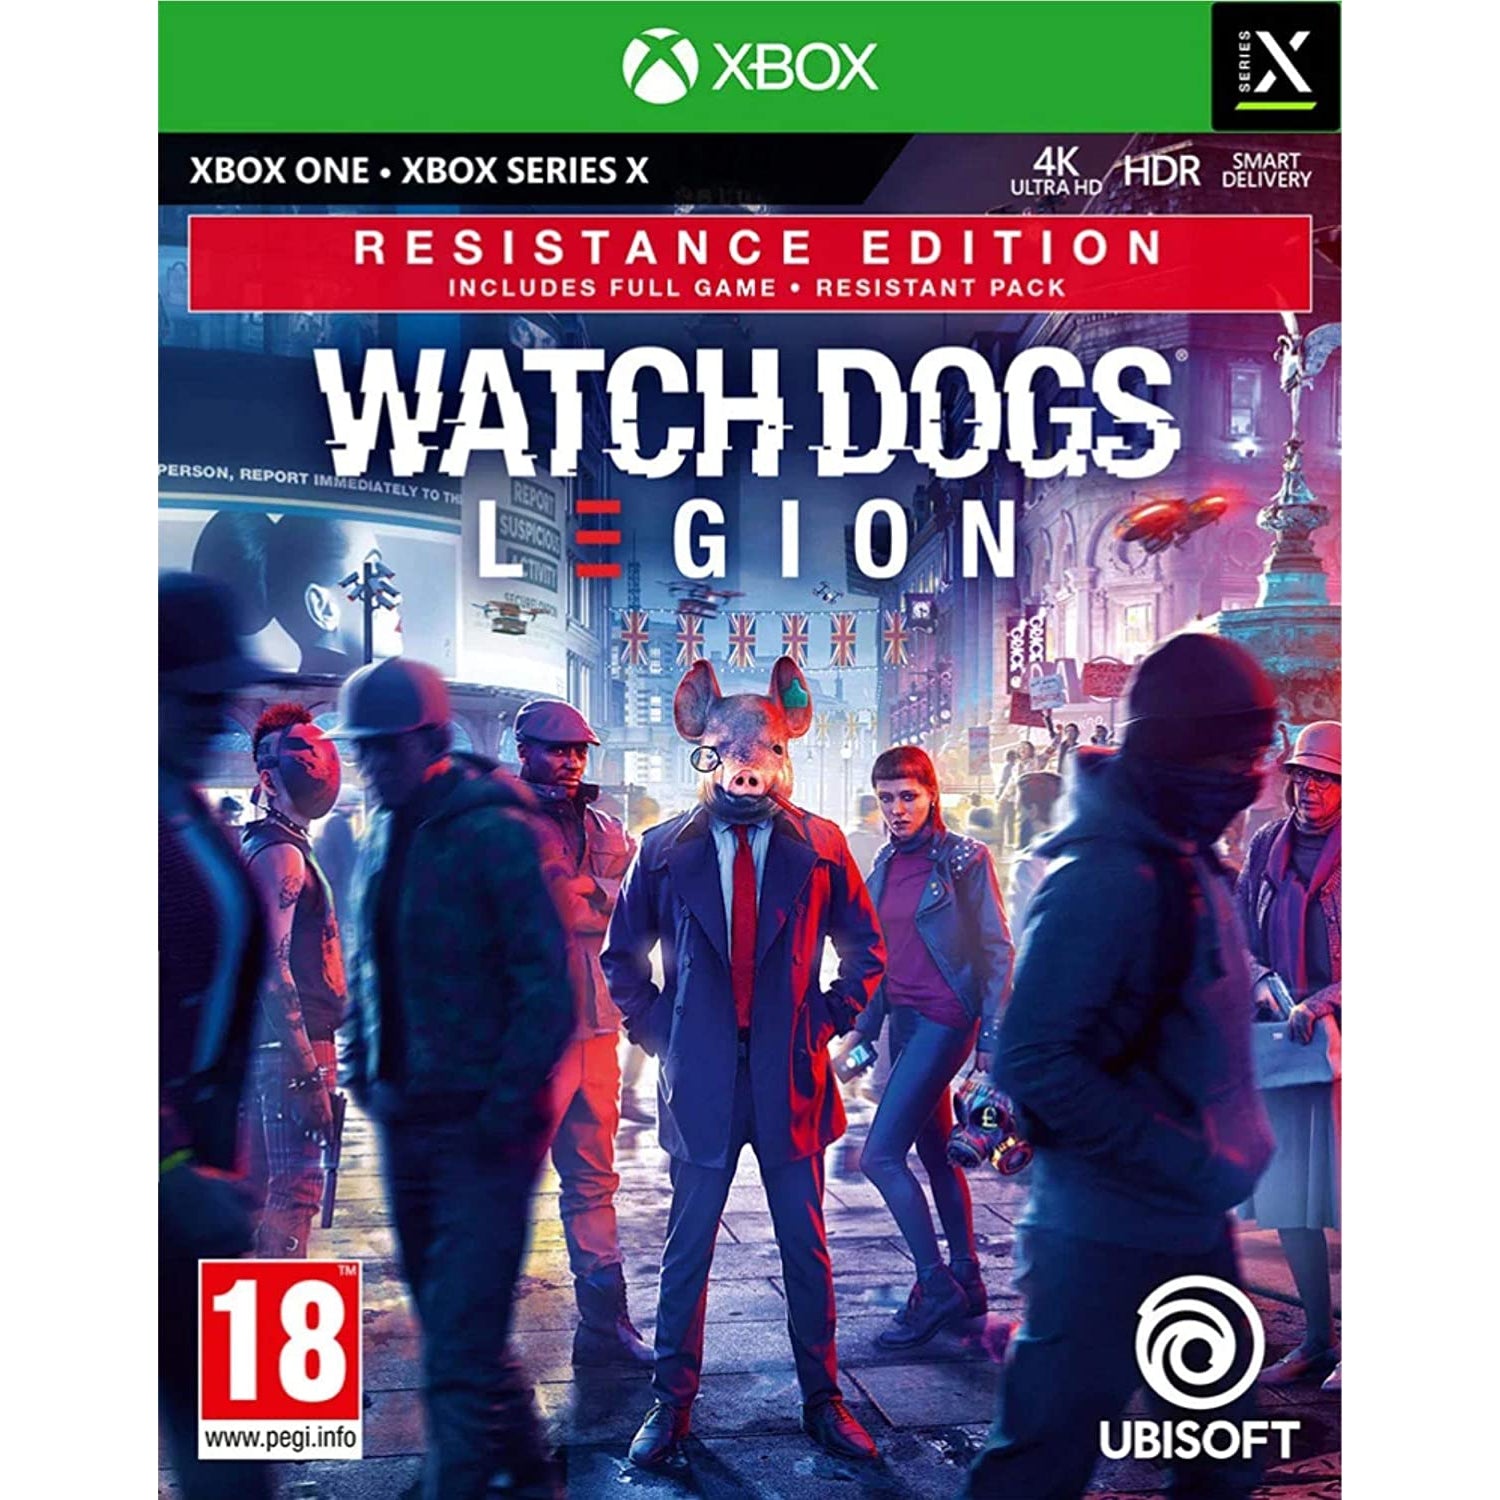 Watch Dogs: Legion Resistance Edition (Xbox One/Series X)